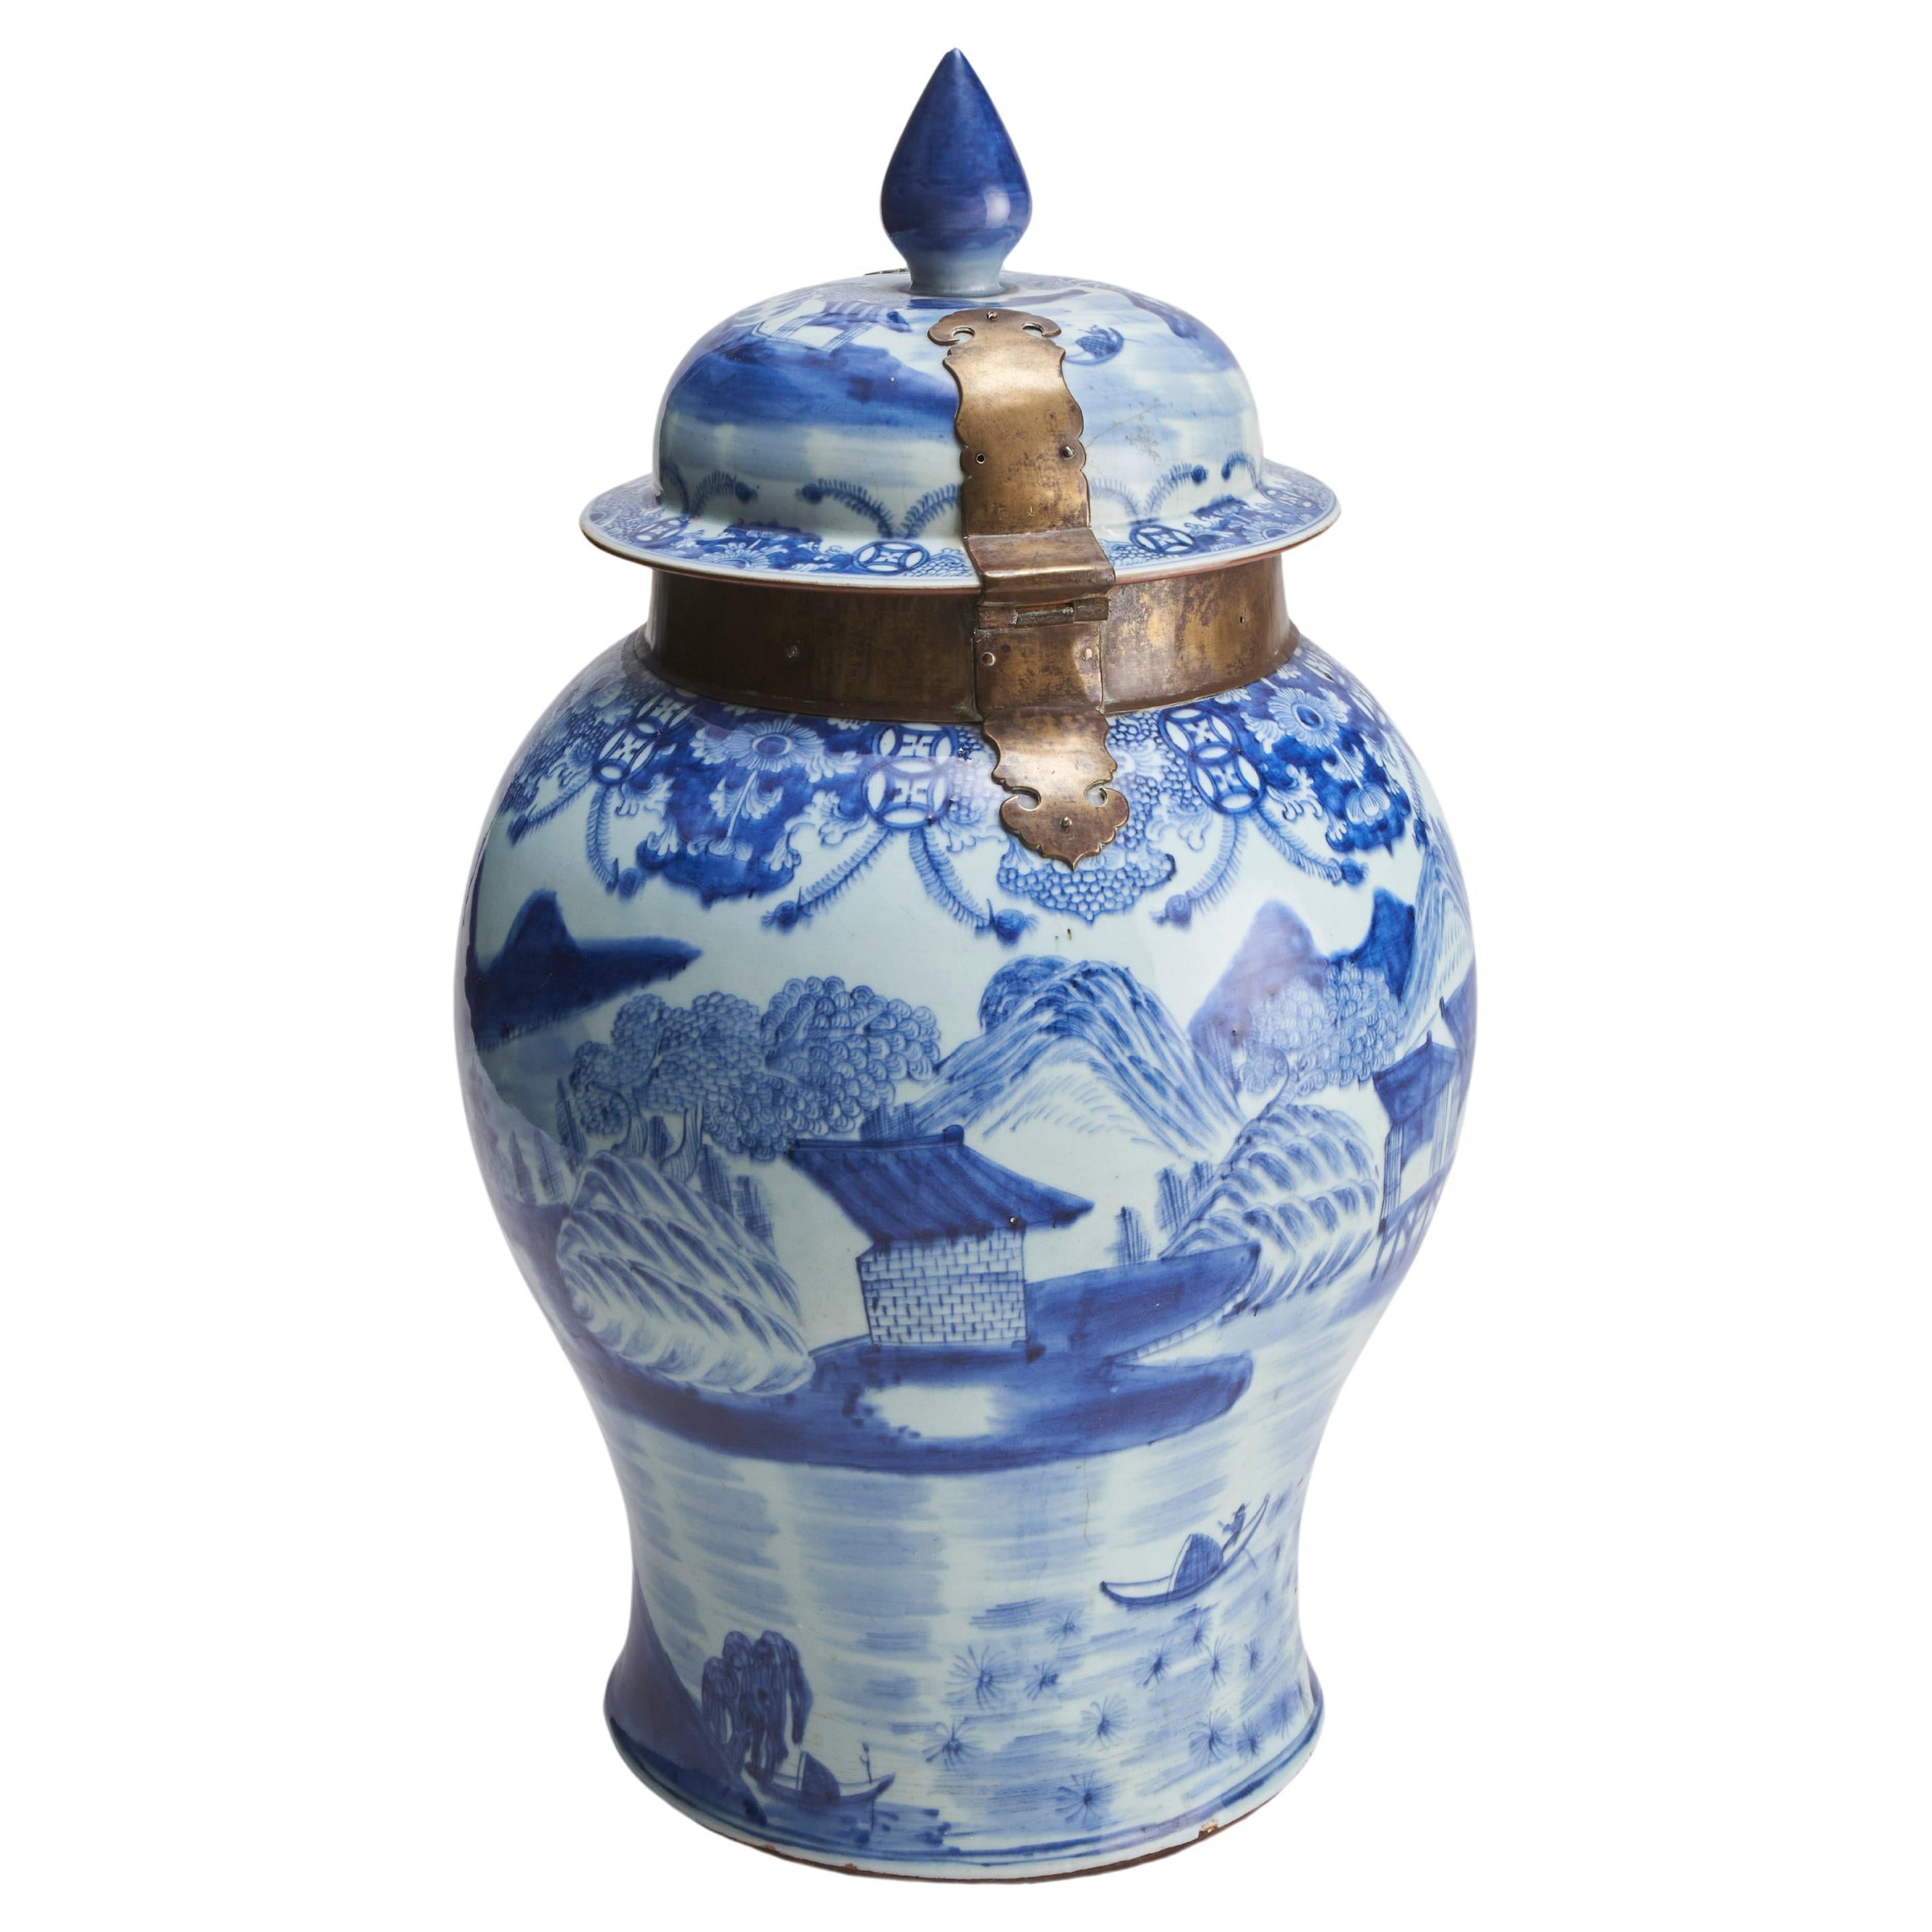 A large, Chinese porcelain Blue and White Temple jar and cover (18th Century)